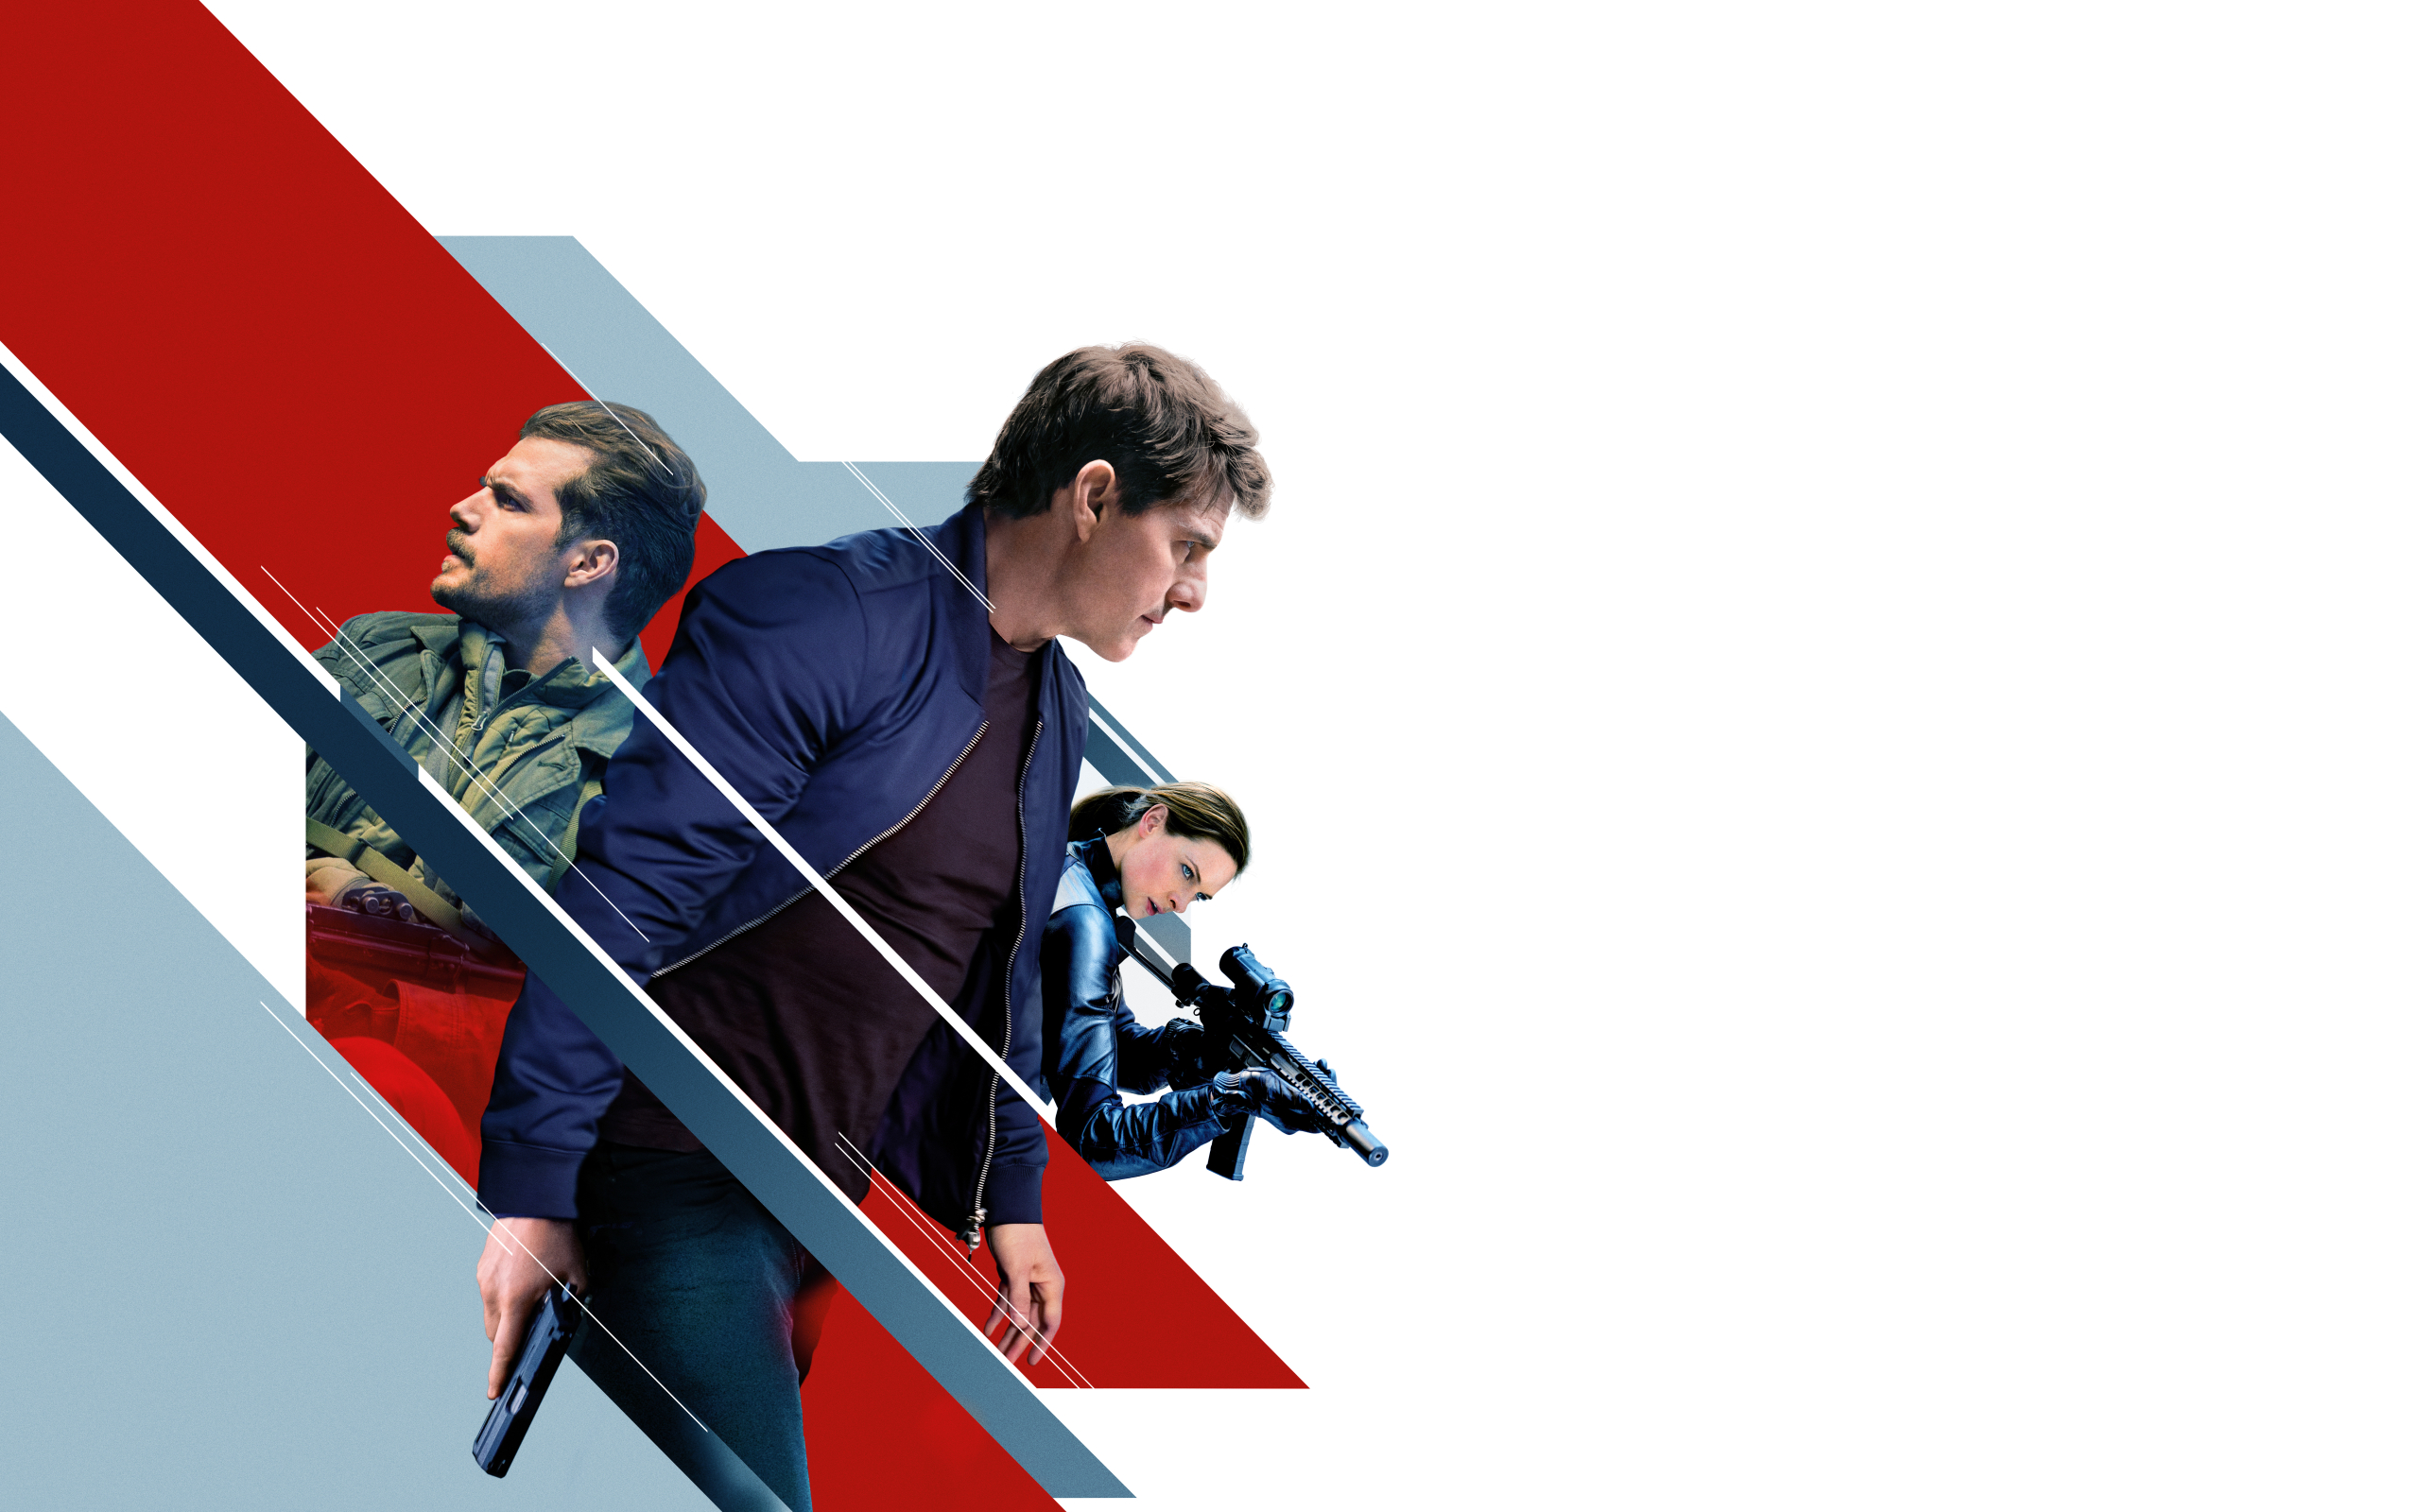 Movie Mission Impossible Fallout Poster Wallpaper Background